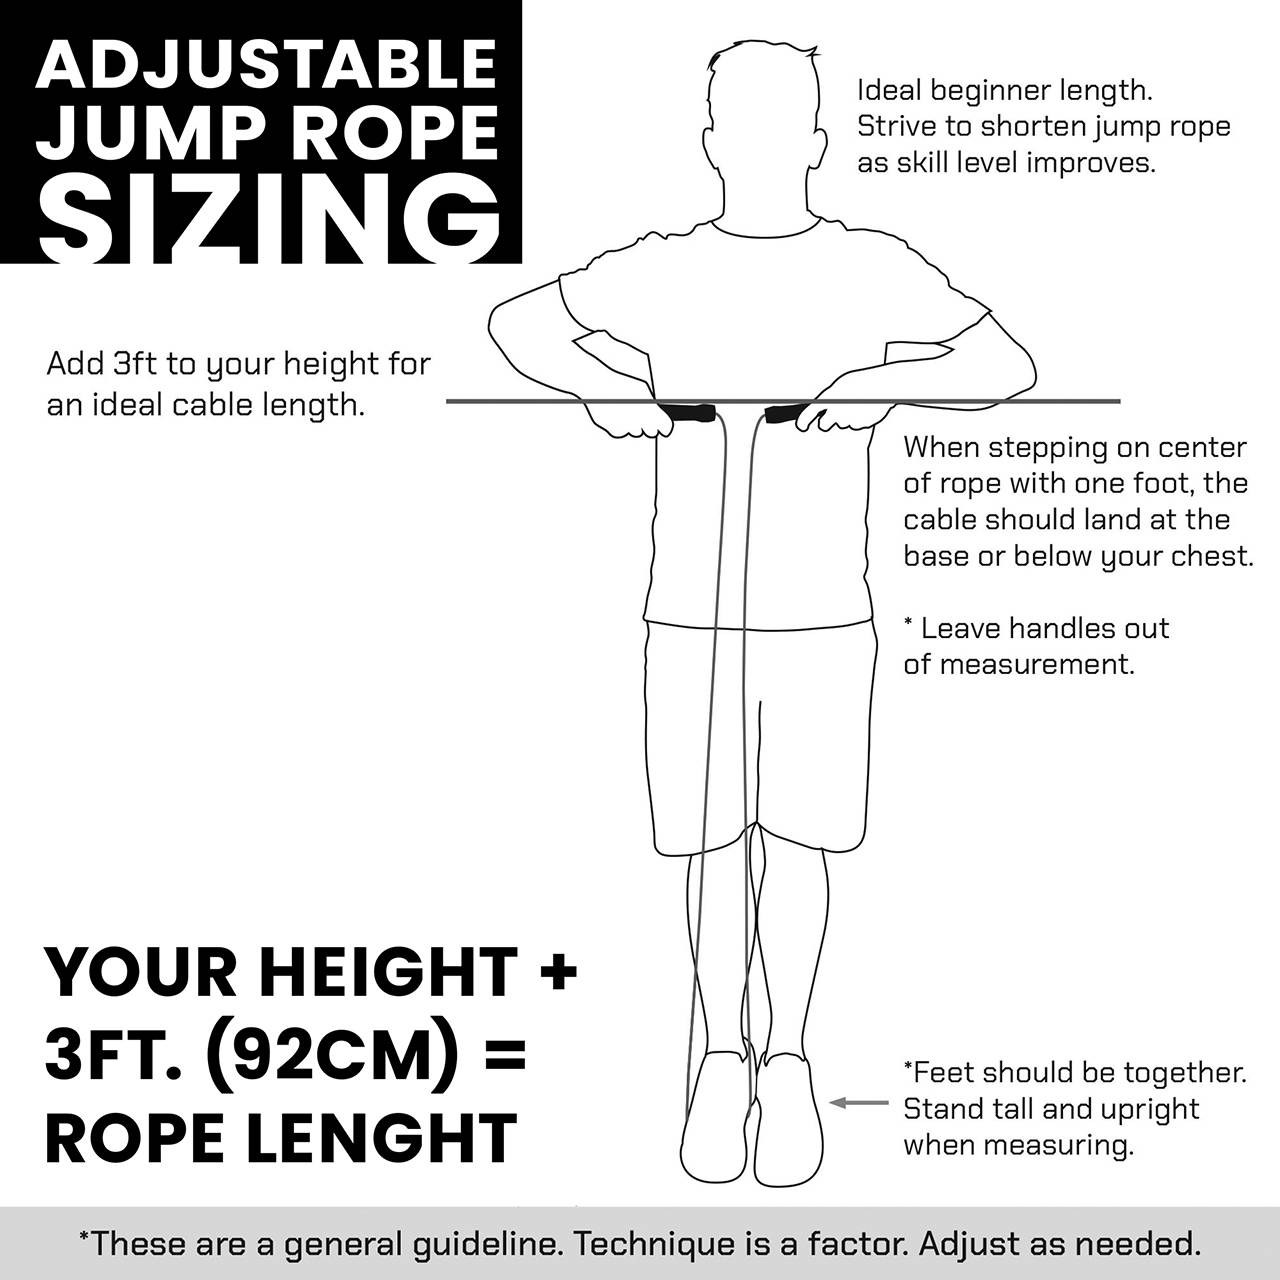 How to Measure Your Jump Rope in 5 Easy Steps